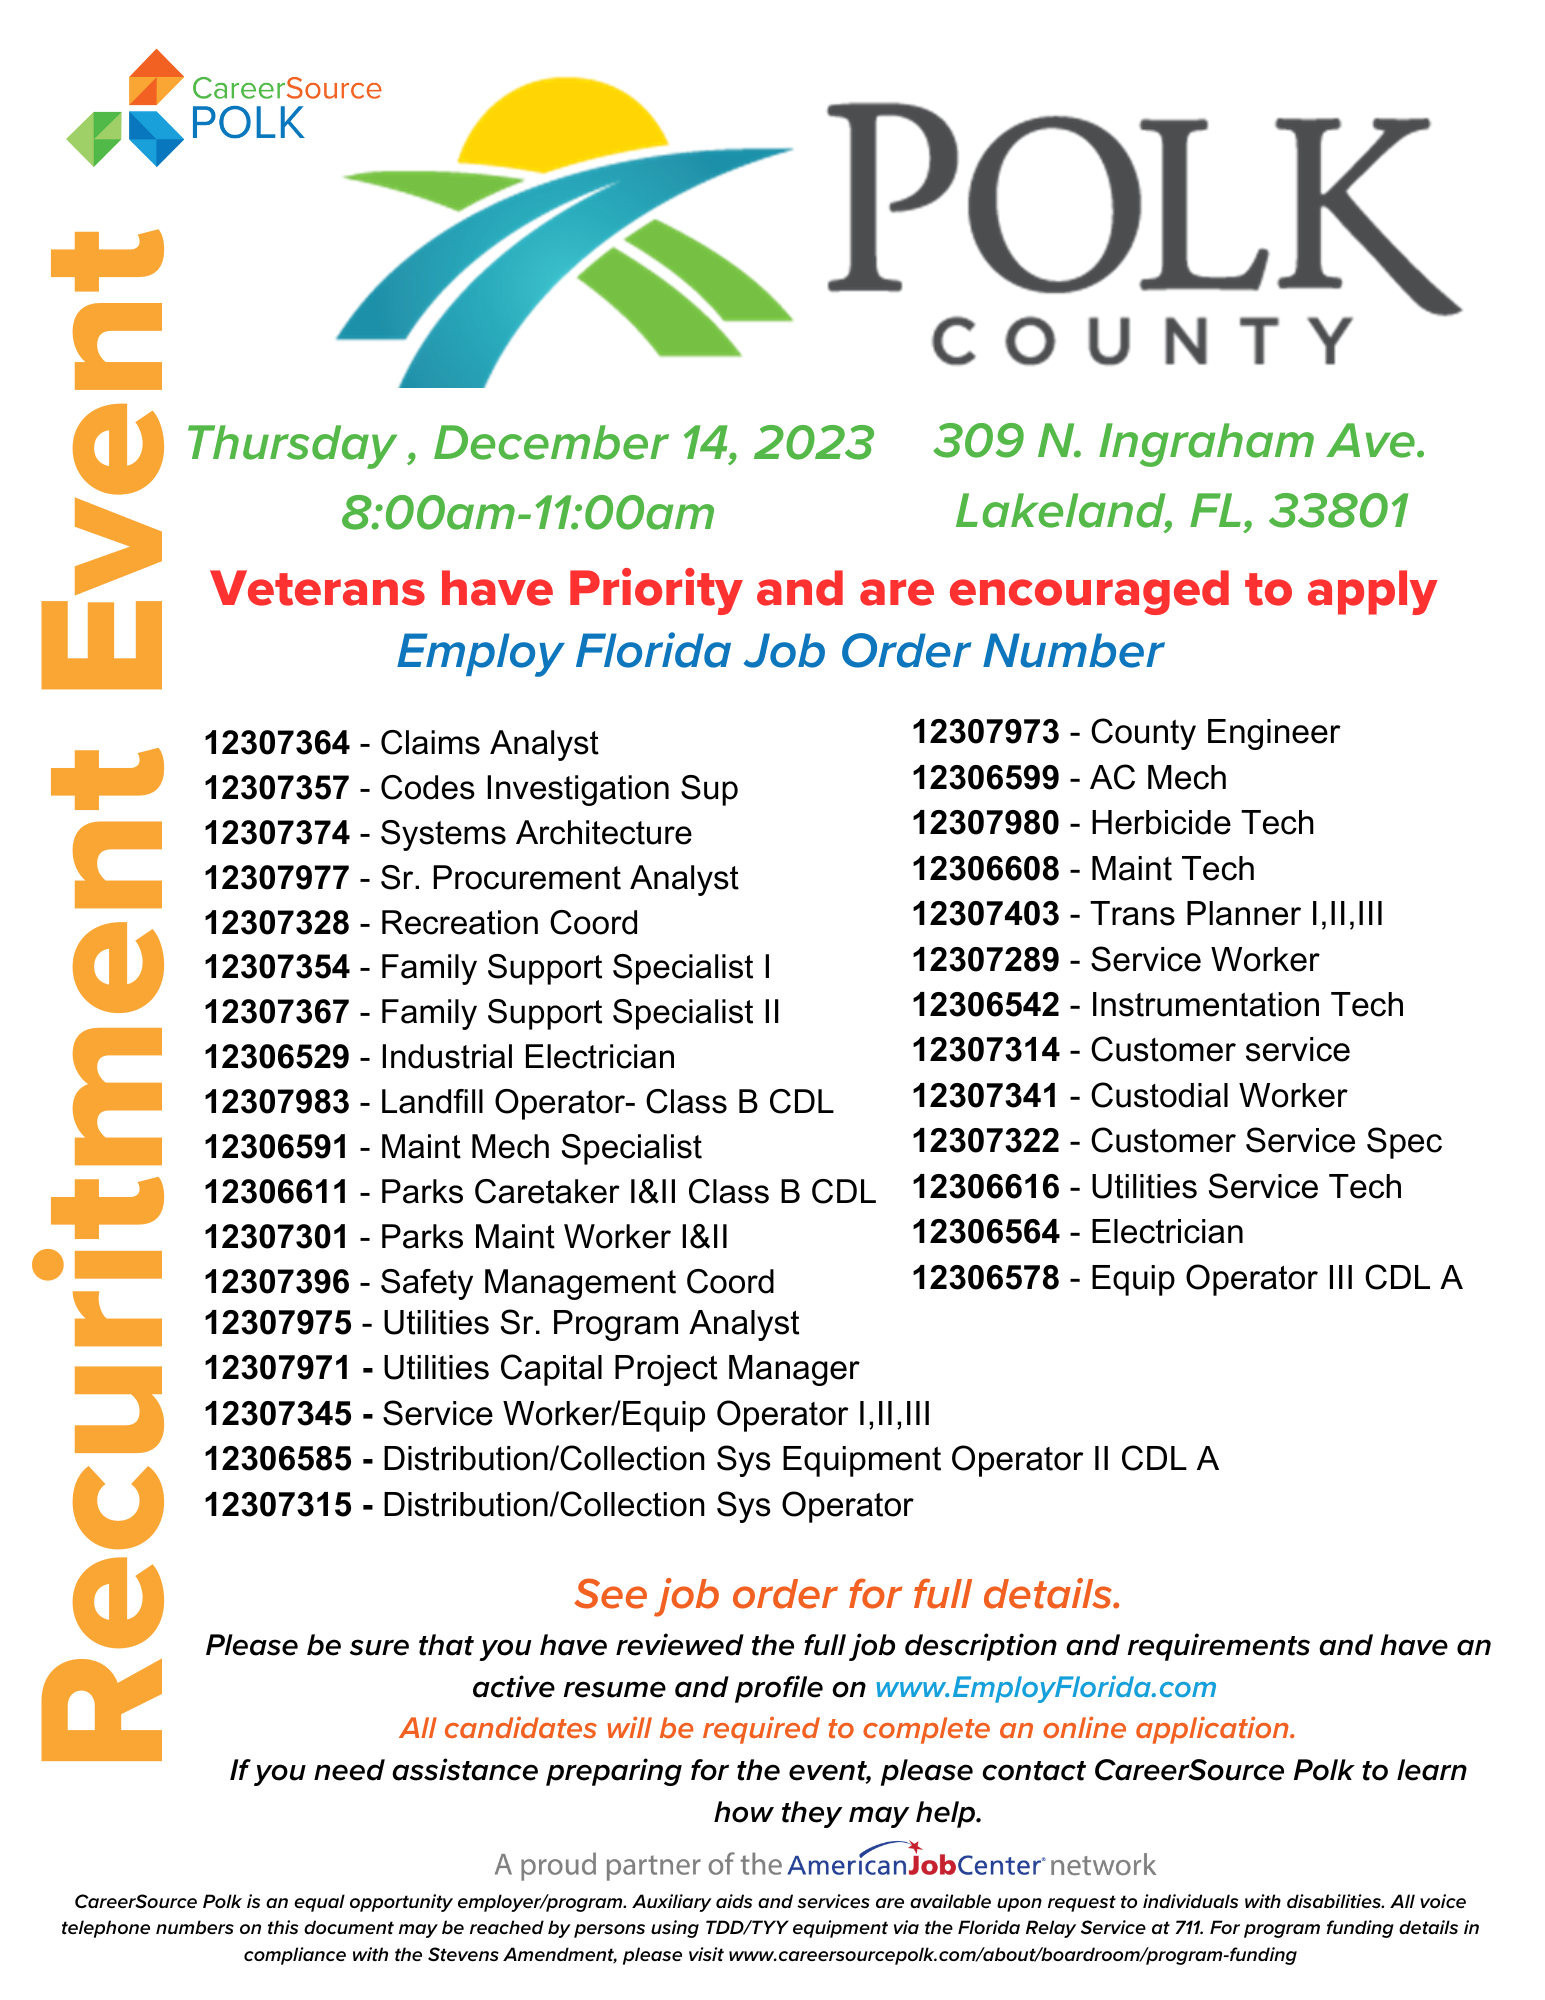 Hiring Event Polk County Board of County Commissioners on December 14 at 309 N Ingraham Ave. in Lakeland FL 33801. Event begins at 8 am and ends at 11 am